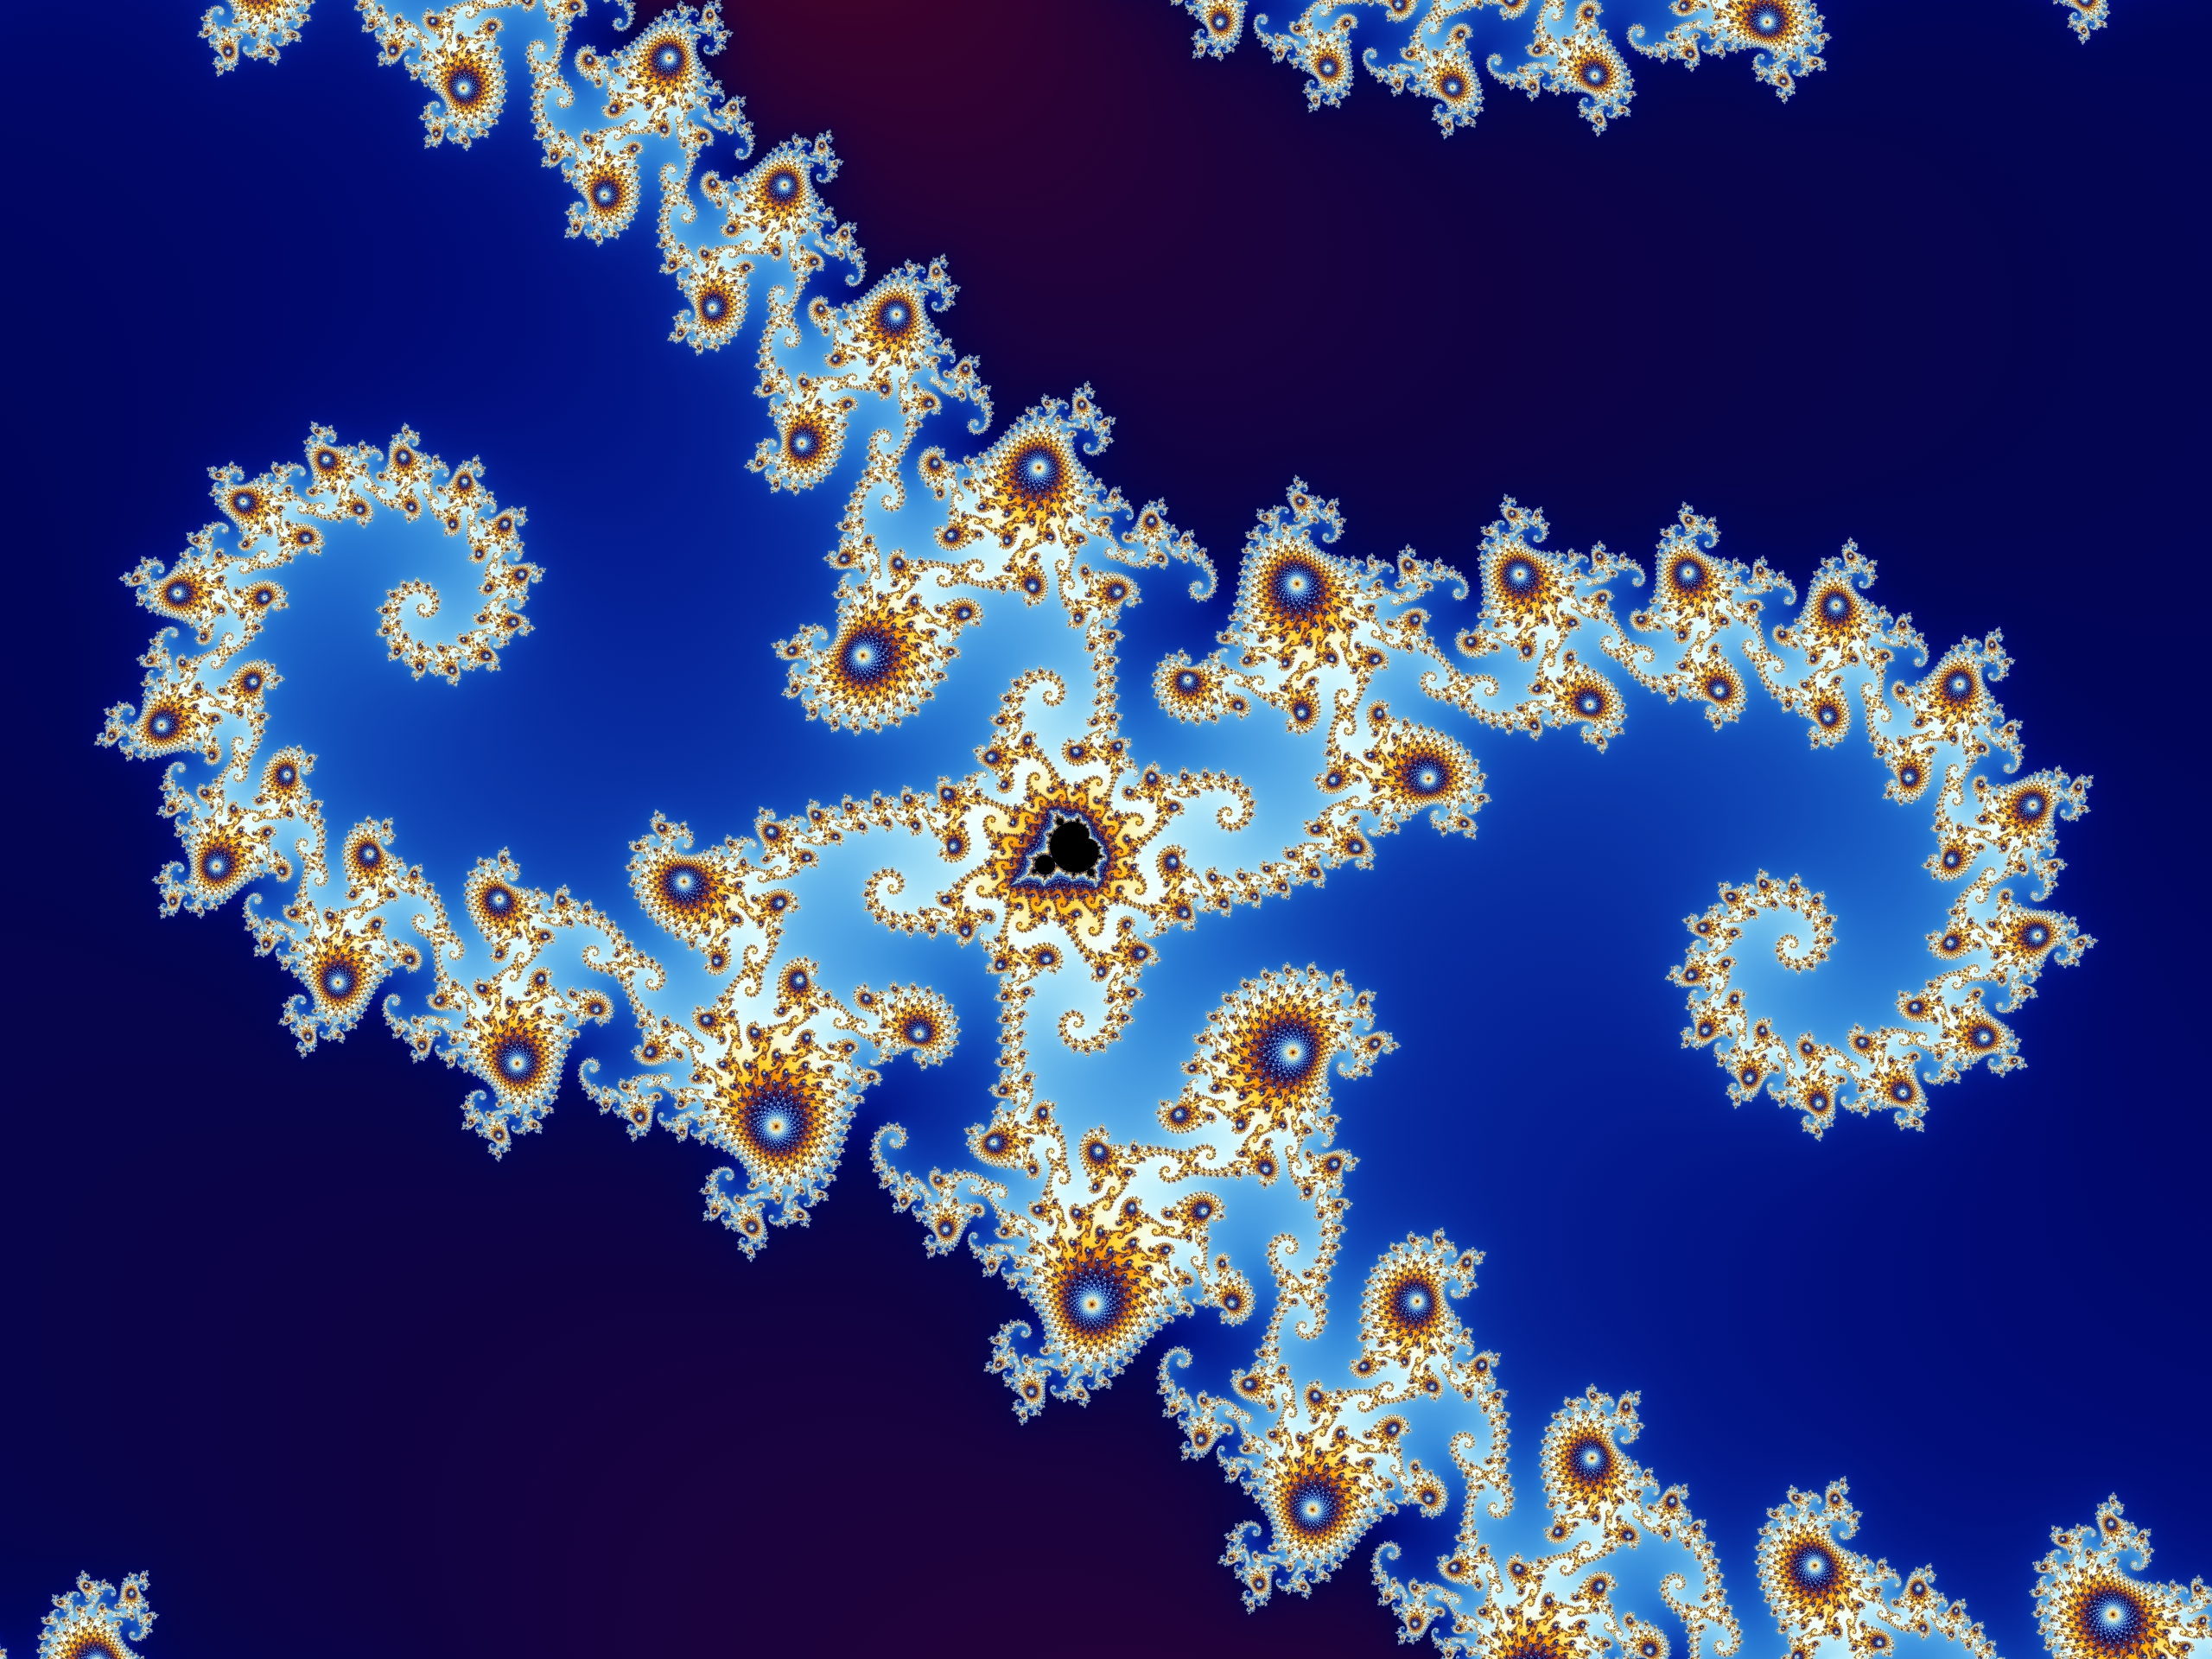 Mandelbrot Setshape Appear The New Bug Is A Universe To Explore